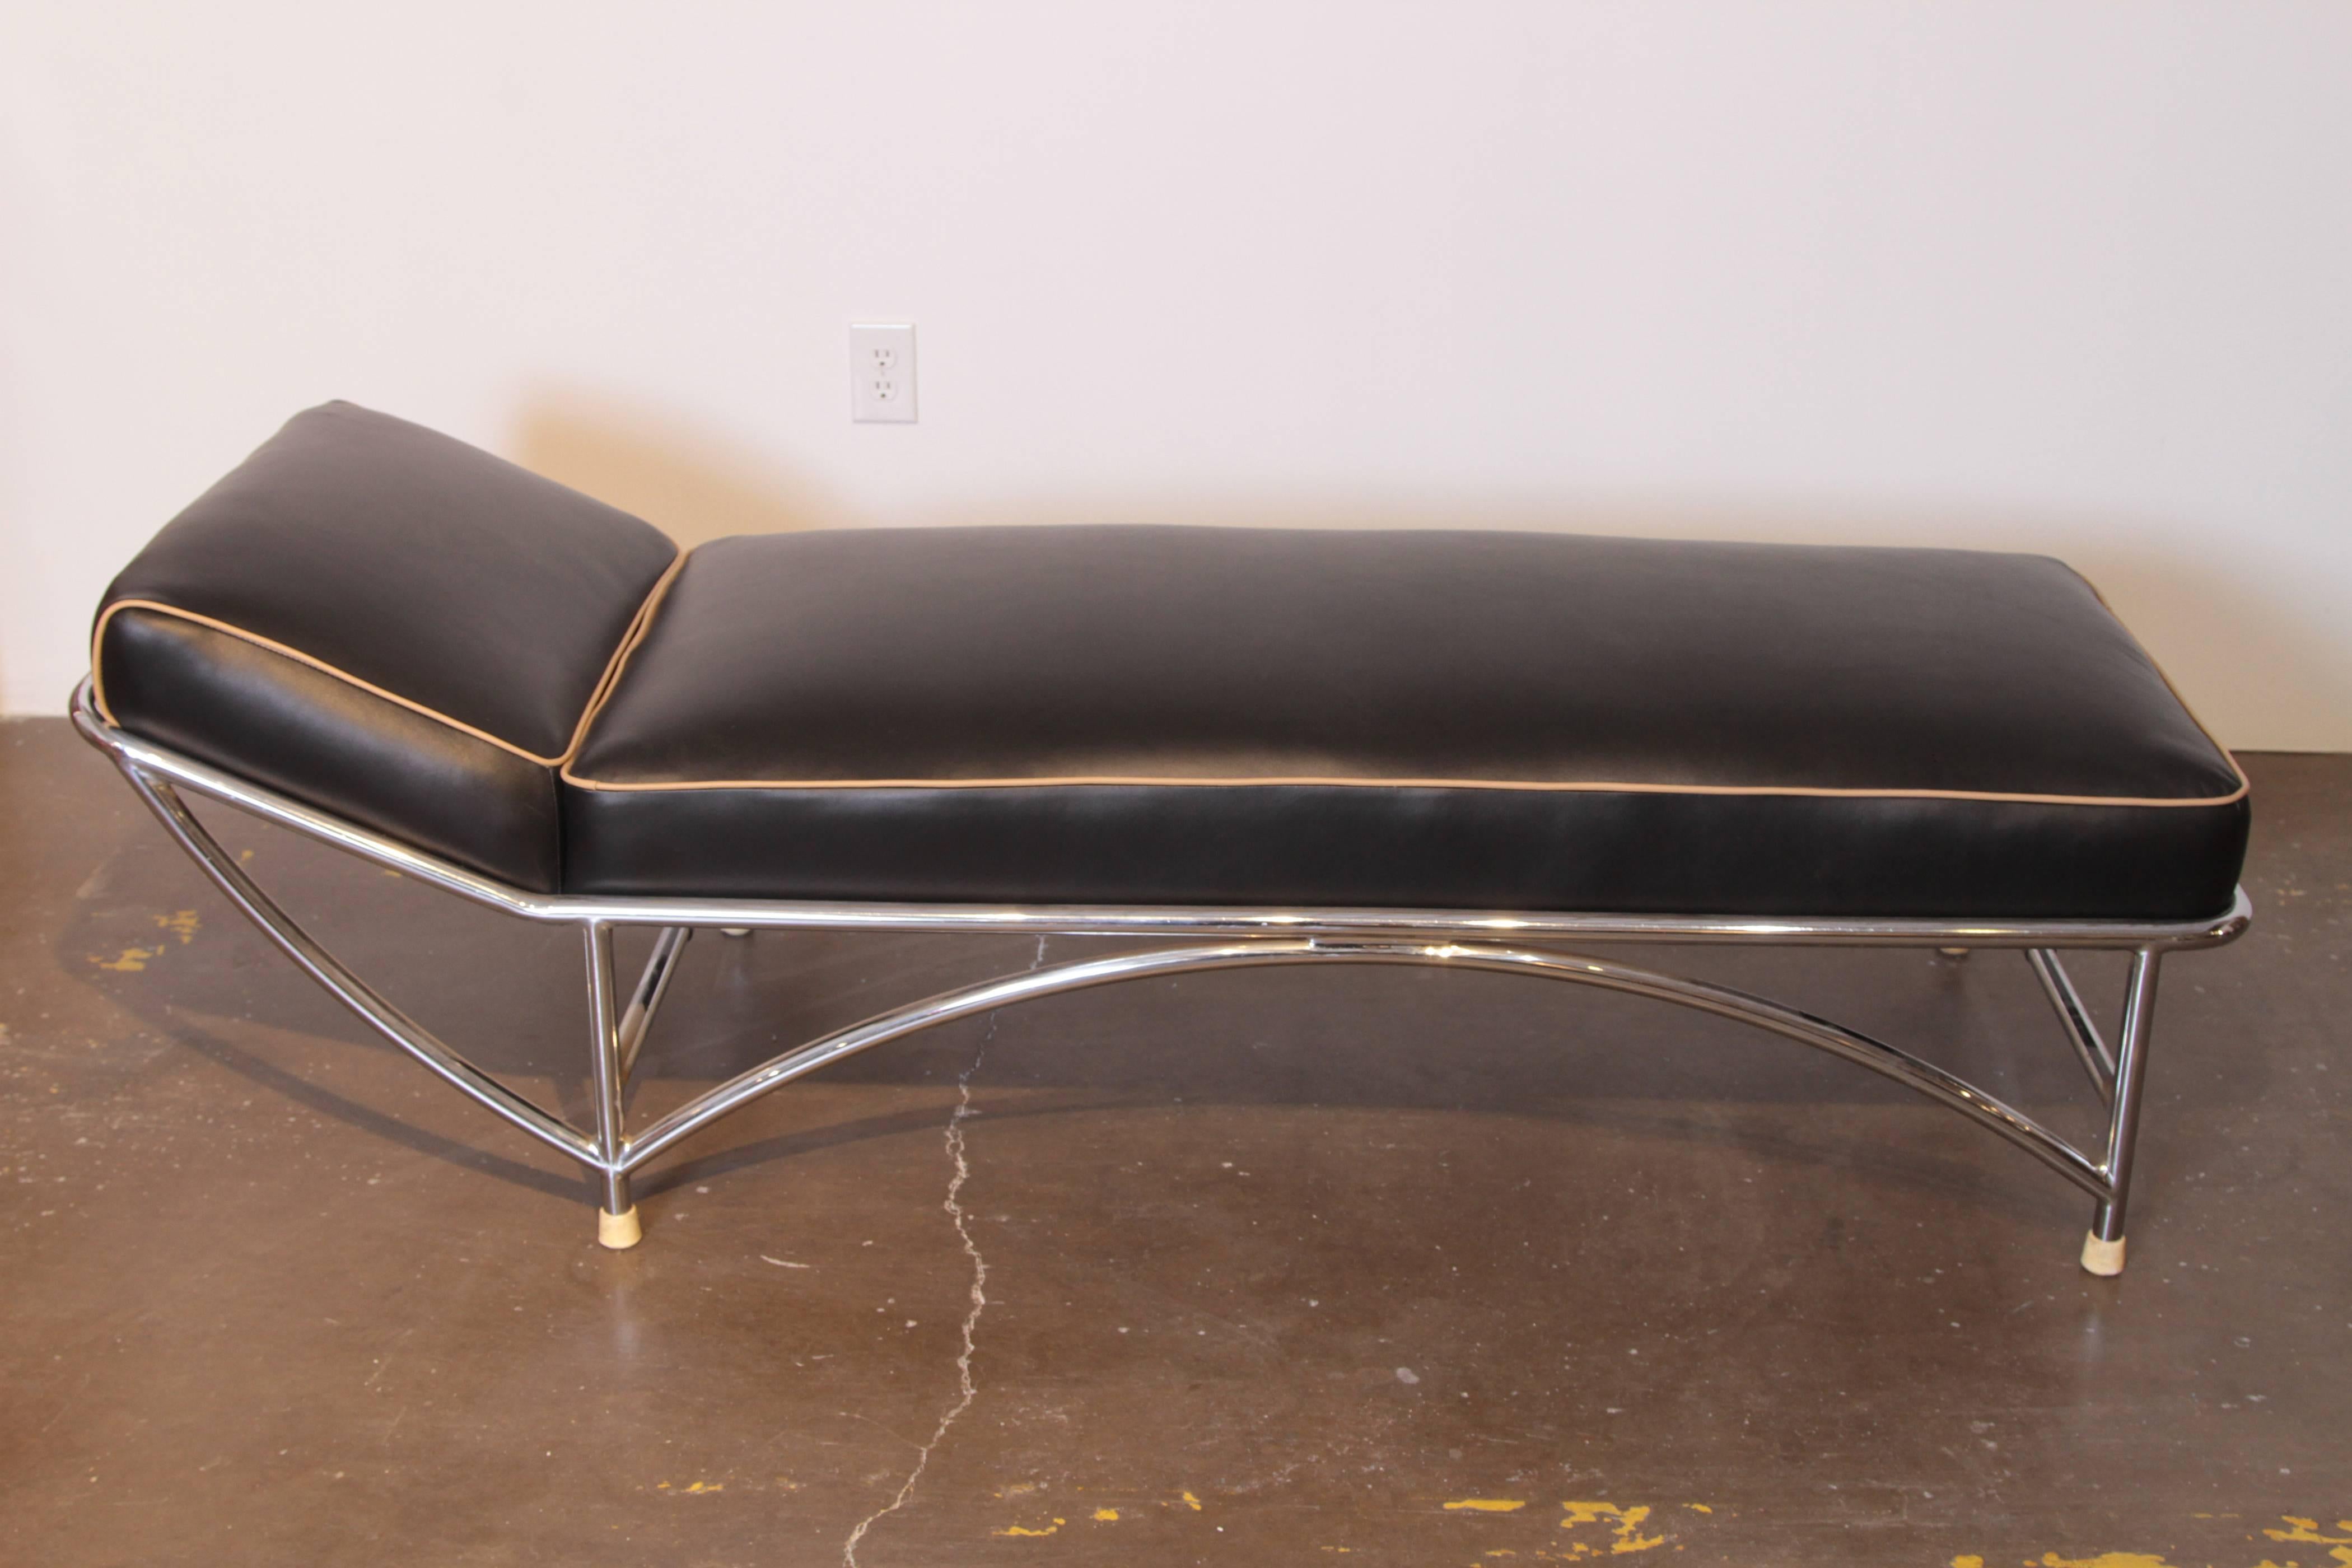 Machine Age Art Deco KEM Weber attributed Lloyd Chromium Furniture Daybed, Lloyd Loom, Lloyd's. Chaise lounge. 

Streamline architectural design attributed to KEM Weber for Lloyd Loom / early Lloyd's chrome.
Significantly earlier and more